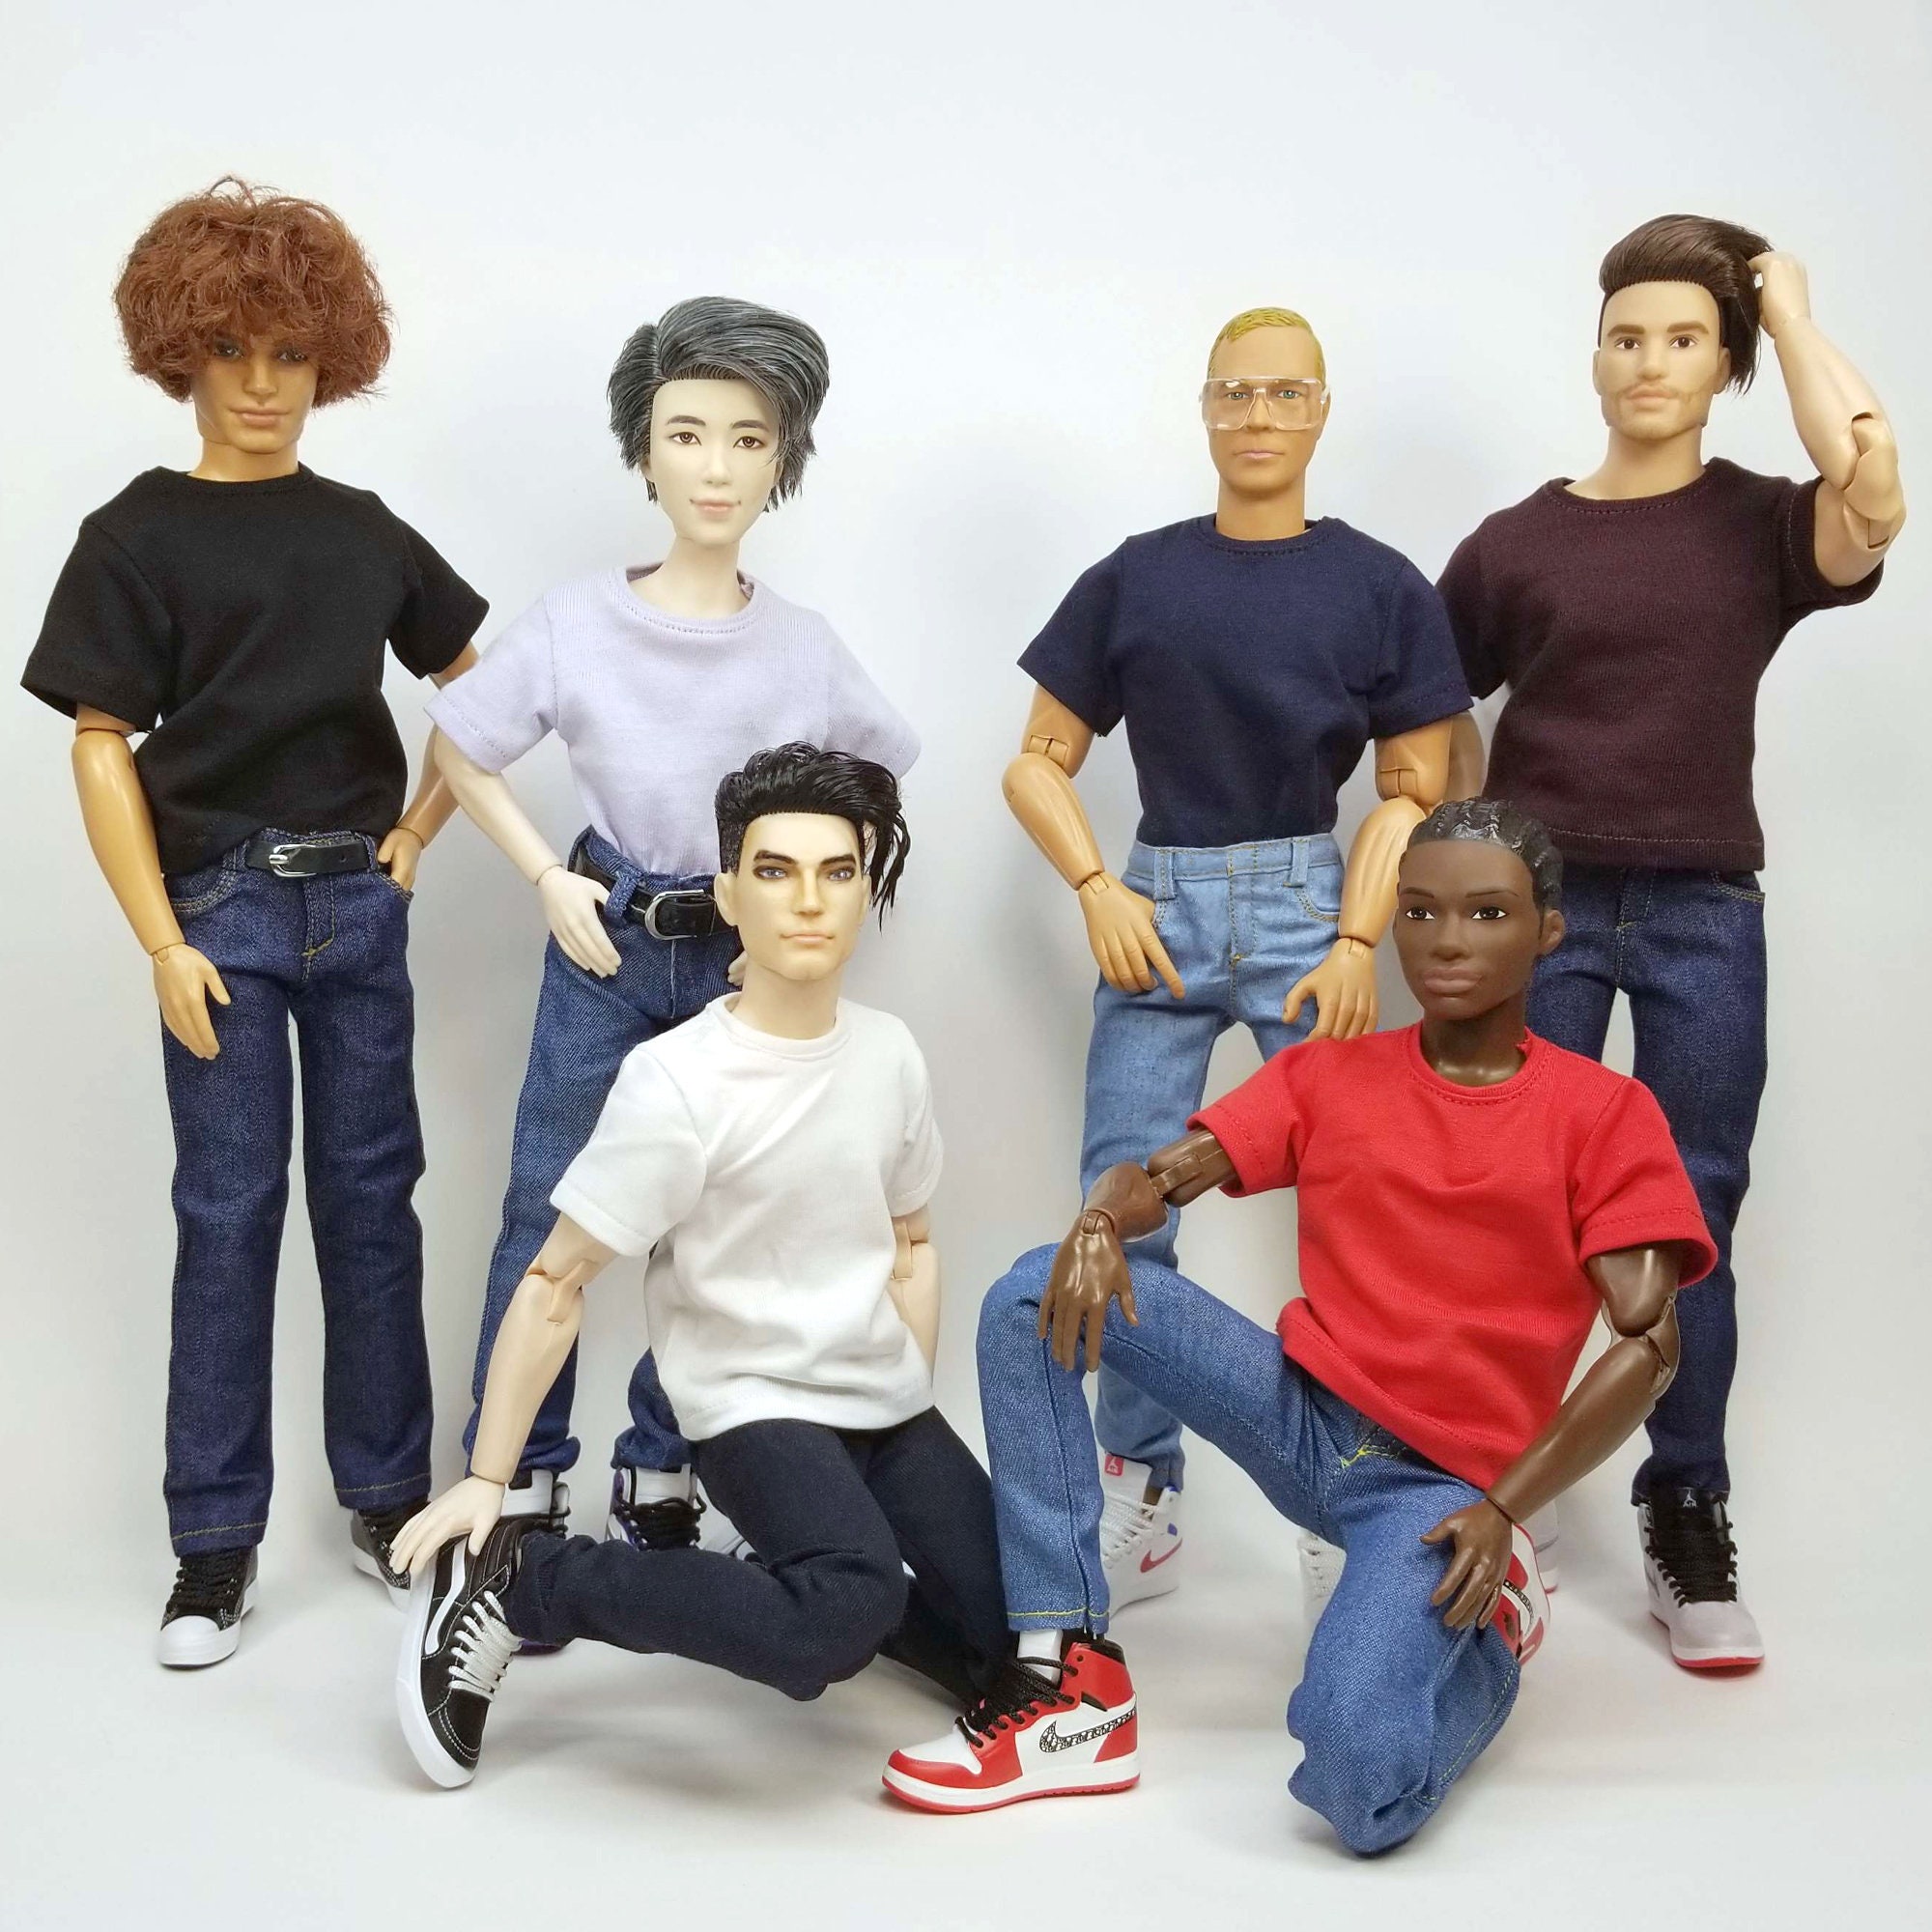 1/6 Scale Female Figure Cool Handsome Clothes Set, Handmade Costume, Jeans  Short & Pant Outfit for 12 Action Figure ,, 